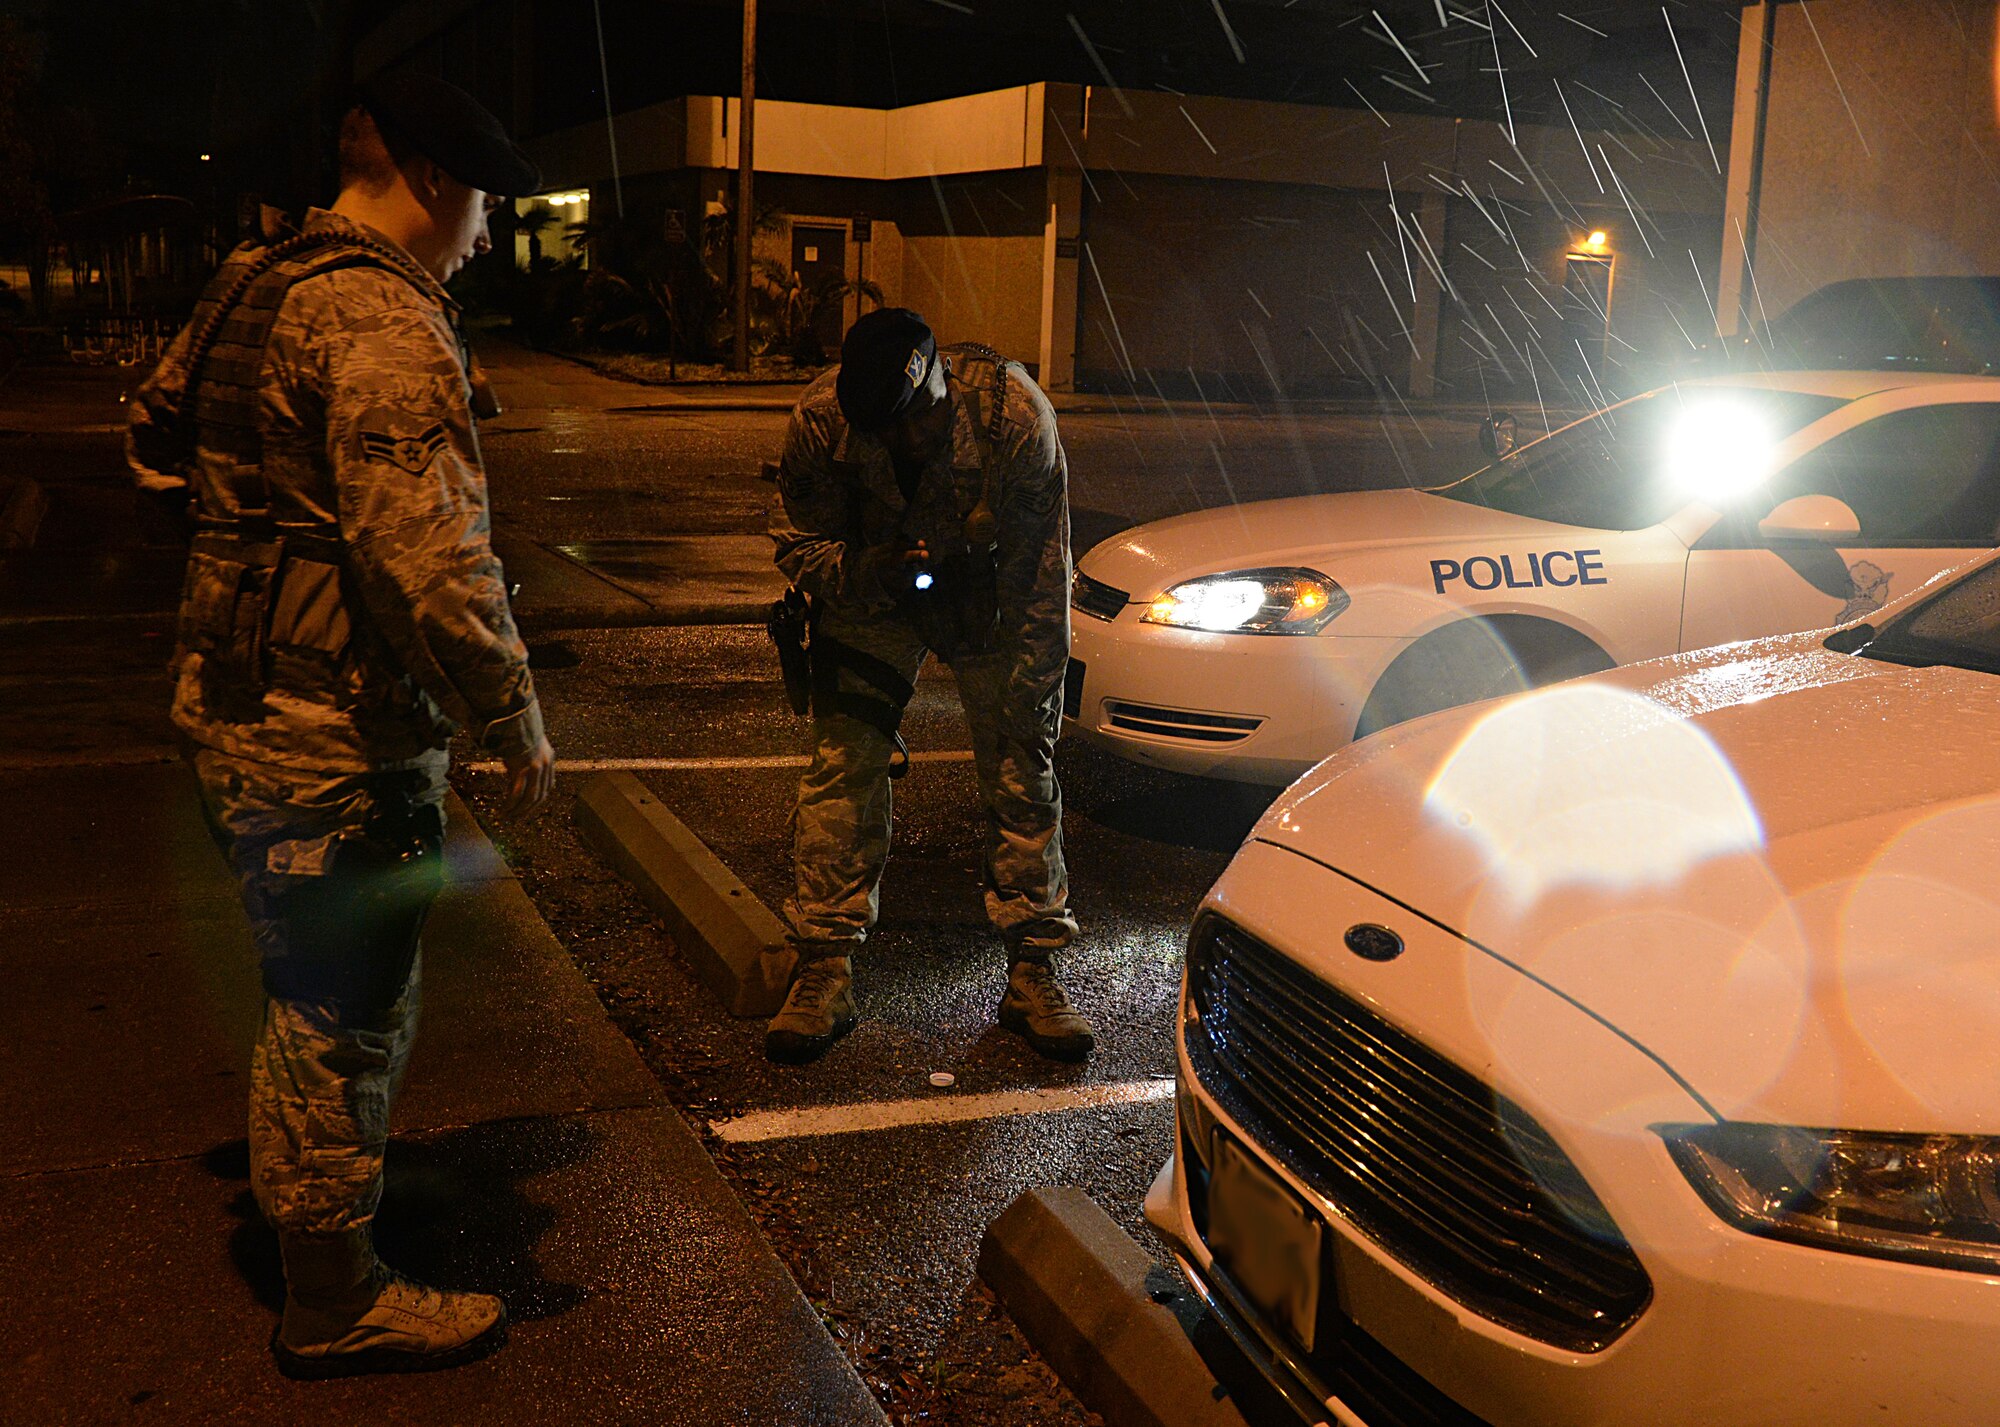 Airman 1st Class Jacob Alexander and Staff Sgt. Jason Moore, 81st Security Forces patrolmen, inspect a vehicle for scratches after a minor car accident March 12, 2015, Keesler Air Force Base, Miss. 81st SFS Airmen perform multiple roles to keep members of Keesler safe, ranging from identification checks at base entrances to searching for explosives and narcotics with military working dogs. (U.S. Air Force photo by Senior Airman Holly Mansfield)